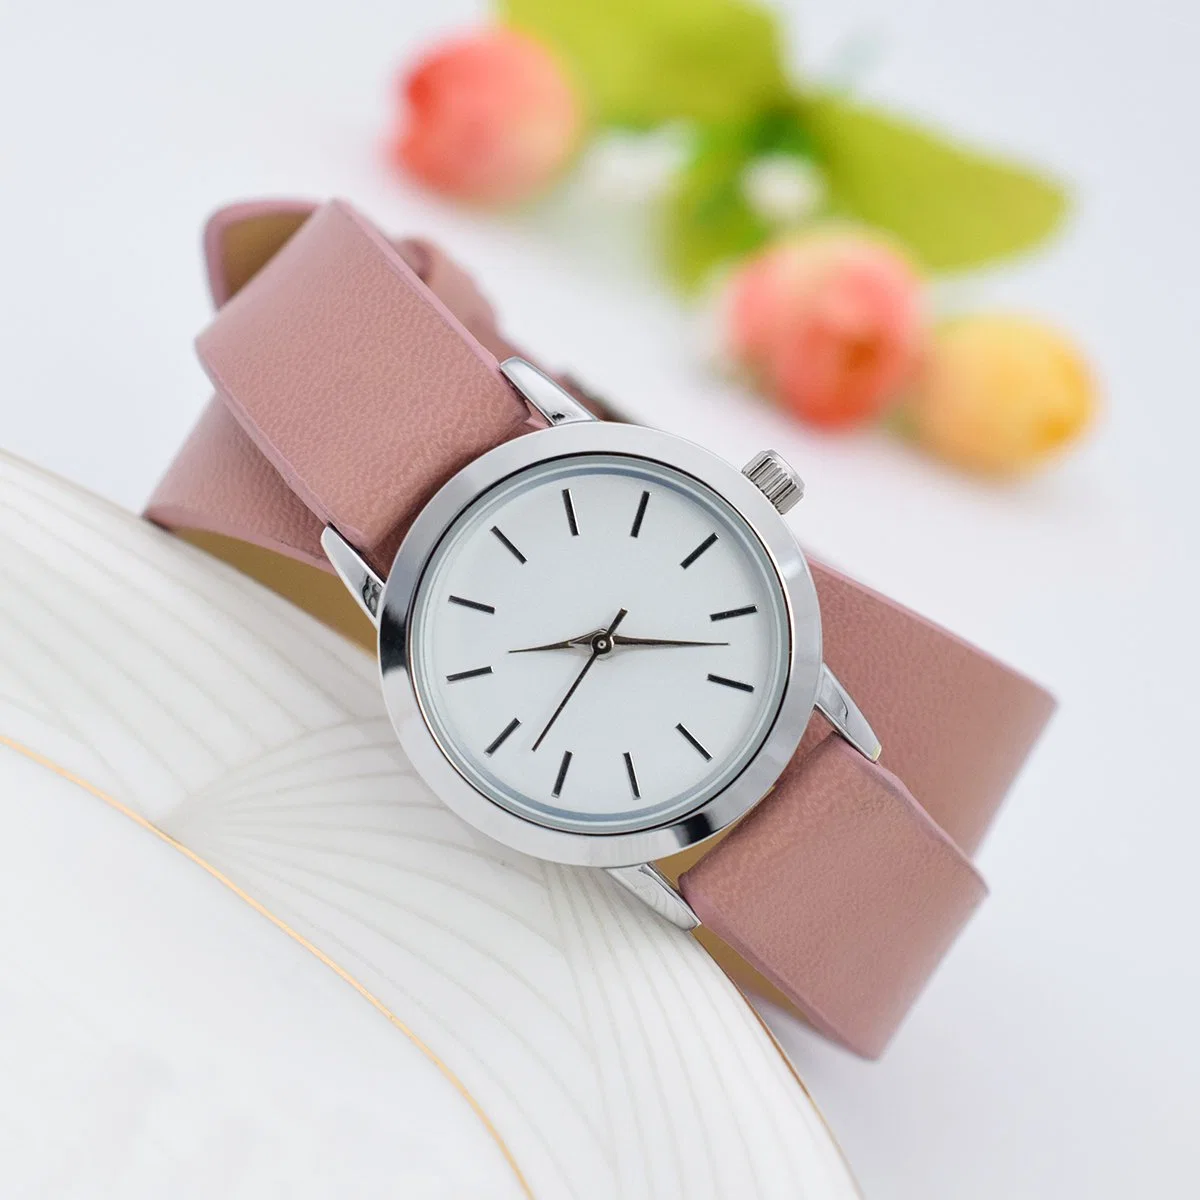 Two Laps Leather Strap Leather Watch Fashion Promotion Watch Factory OEM Watch Stock Watch